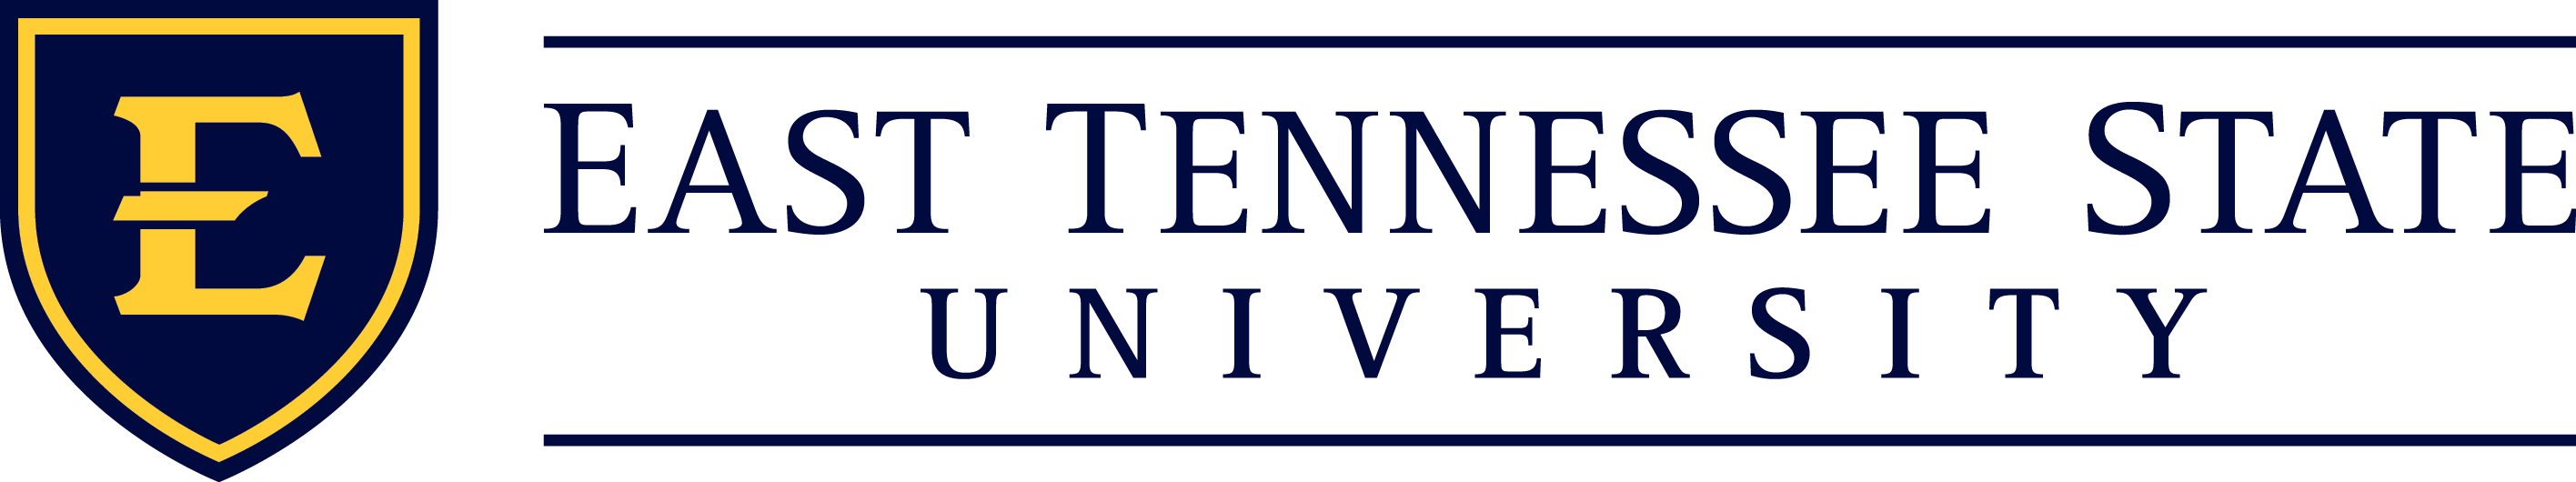 East Tennessee logo